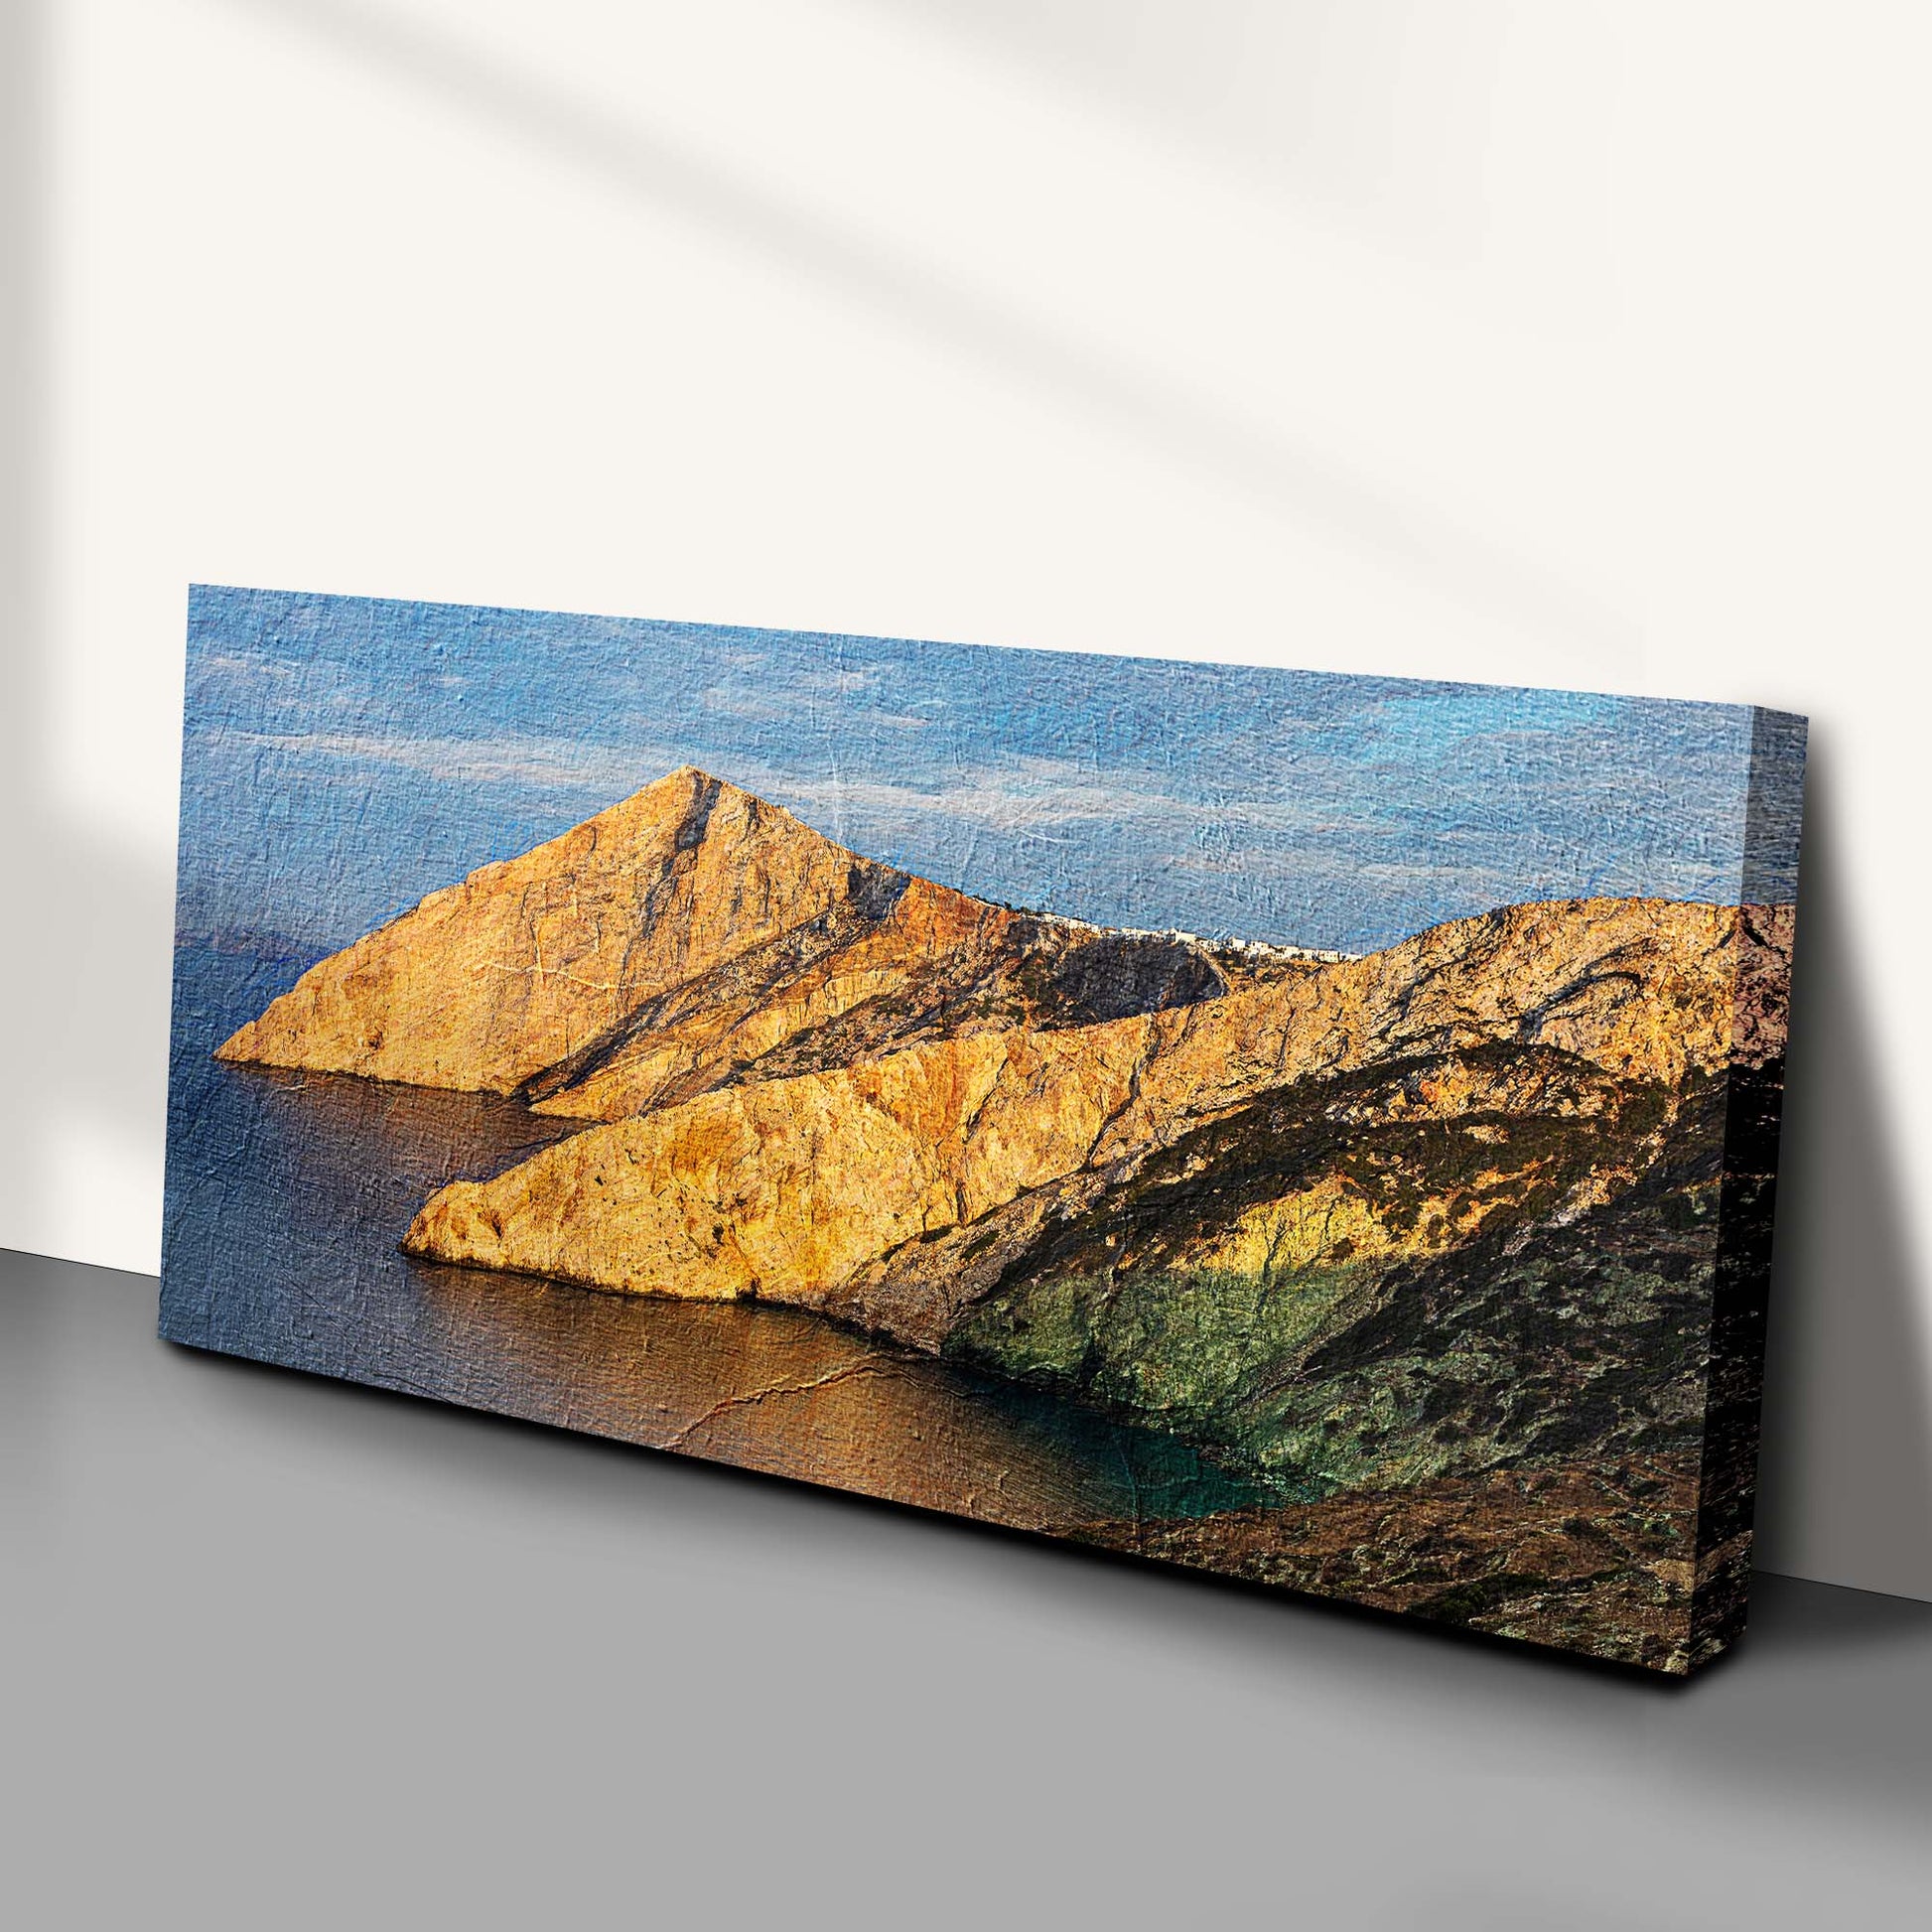 Summer Ocean Cliff Canvas Wall Art Style 1 - Image by Tailored Canvases